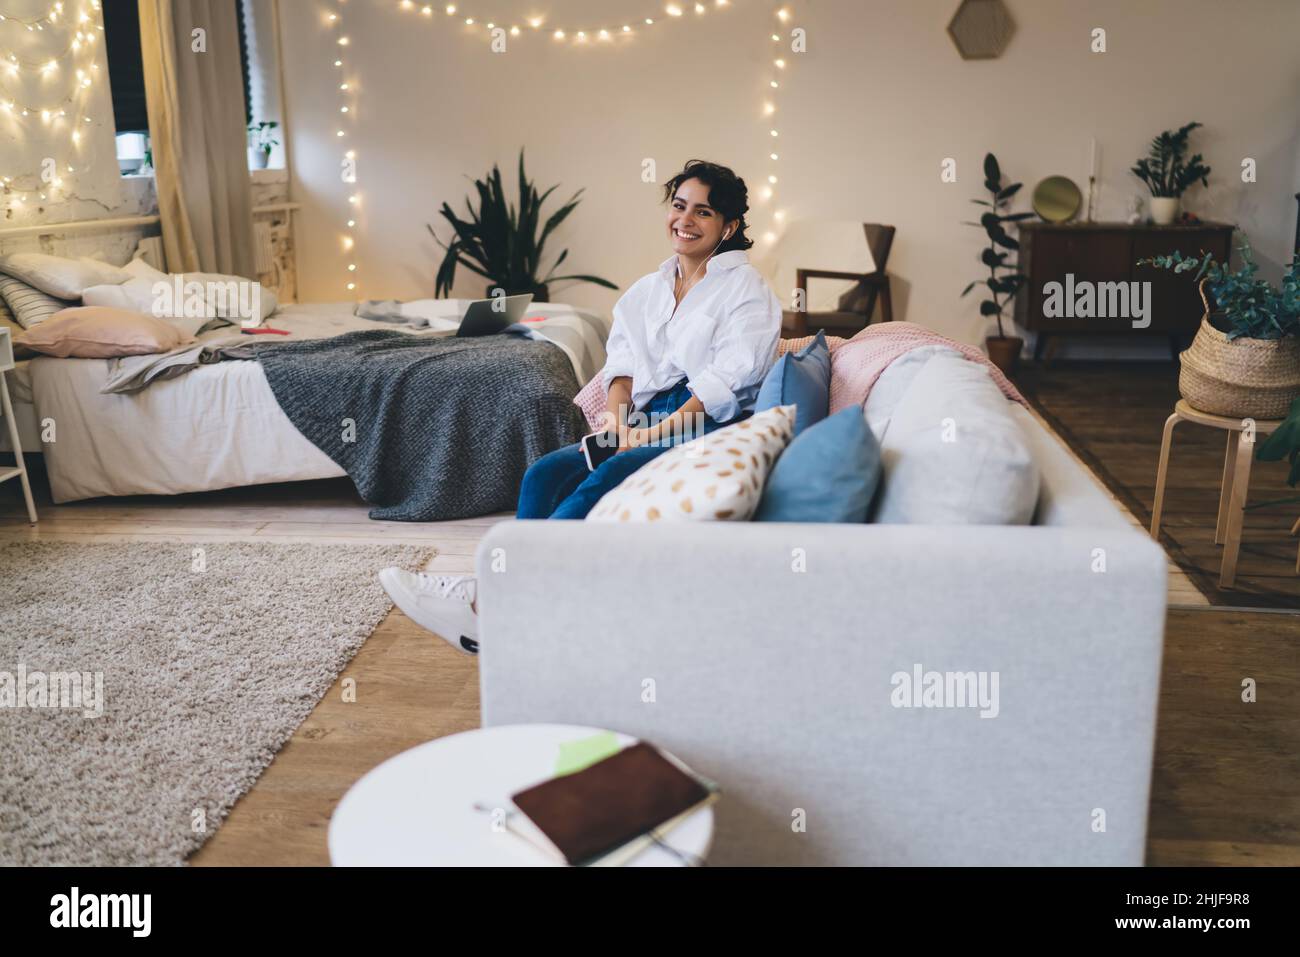 Smiling woman resting on sofa in cozy bedroom Stock Photo